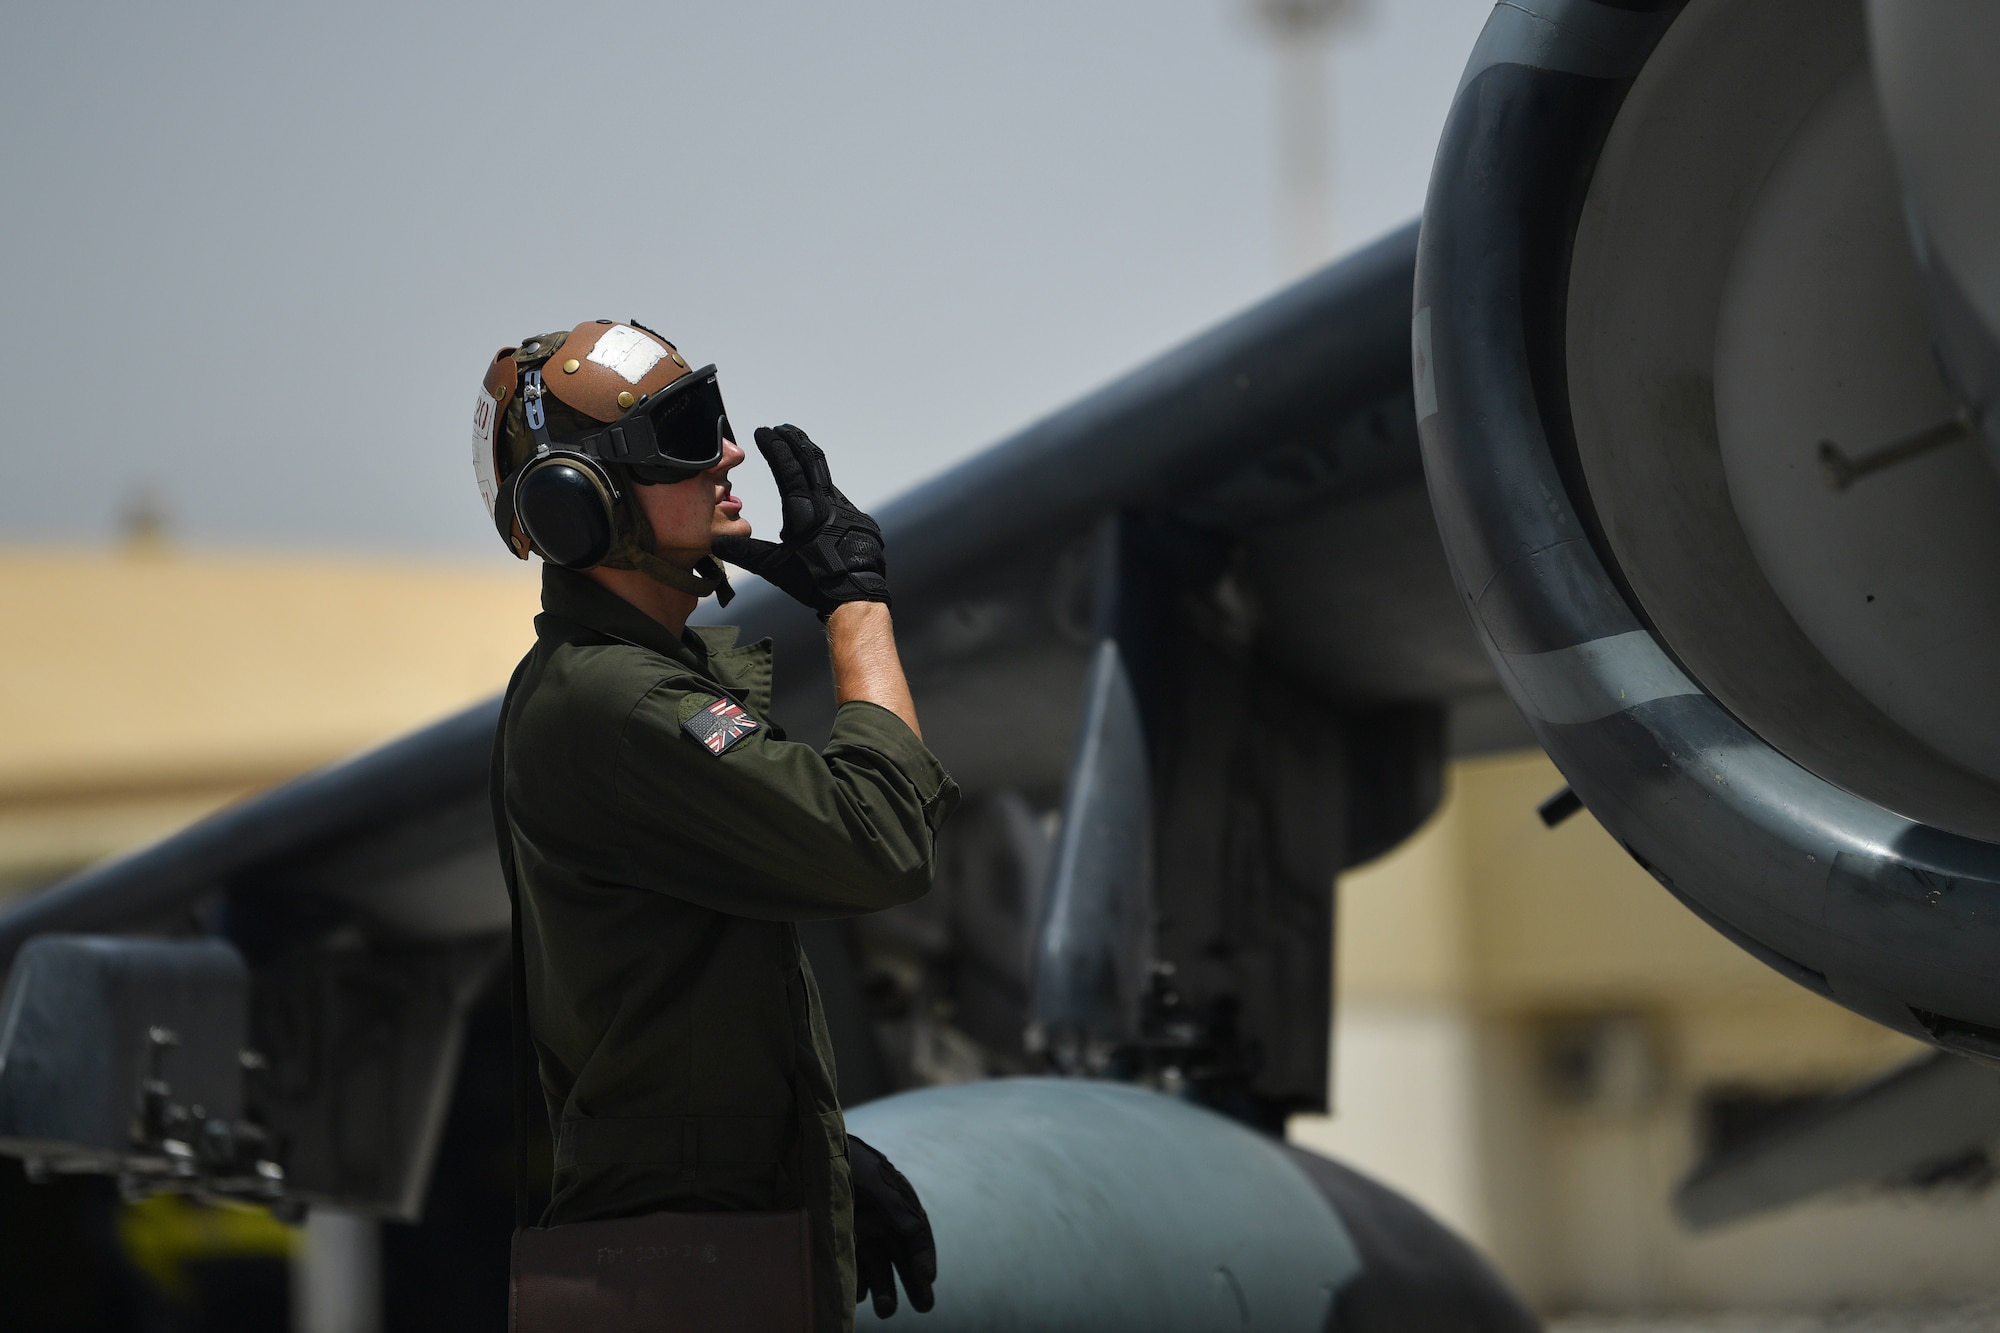 A U.S. Marine communicates with the pilot of an AV-8B Harrier II before taking off during Desert Flag 19-2 in Southwest Asia, April 28, 2019. Desert Flag is designed to exercise combined Air Forces in military operations to enhance competence and strengthen military-to-military relationships and regional security.